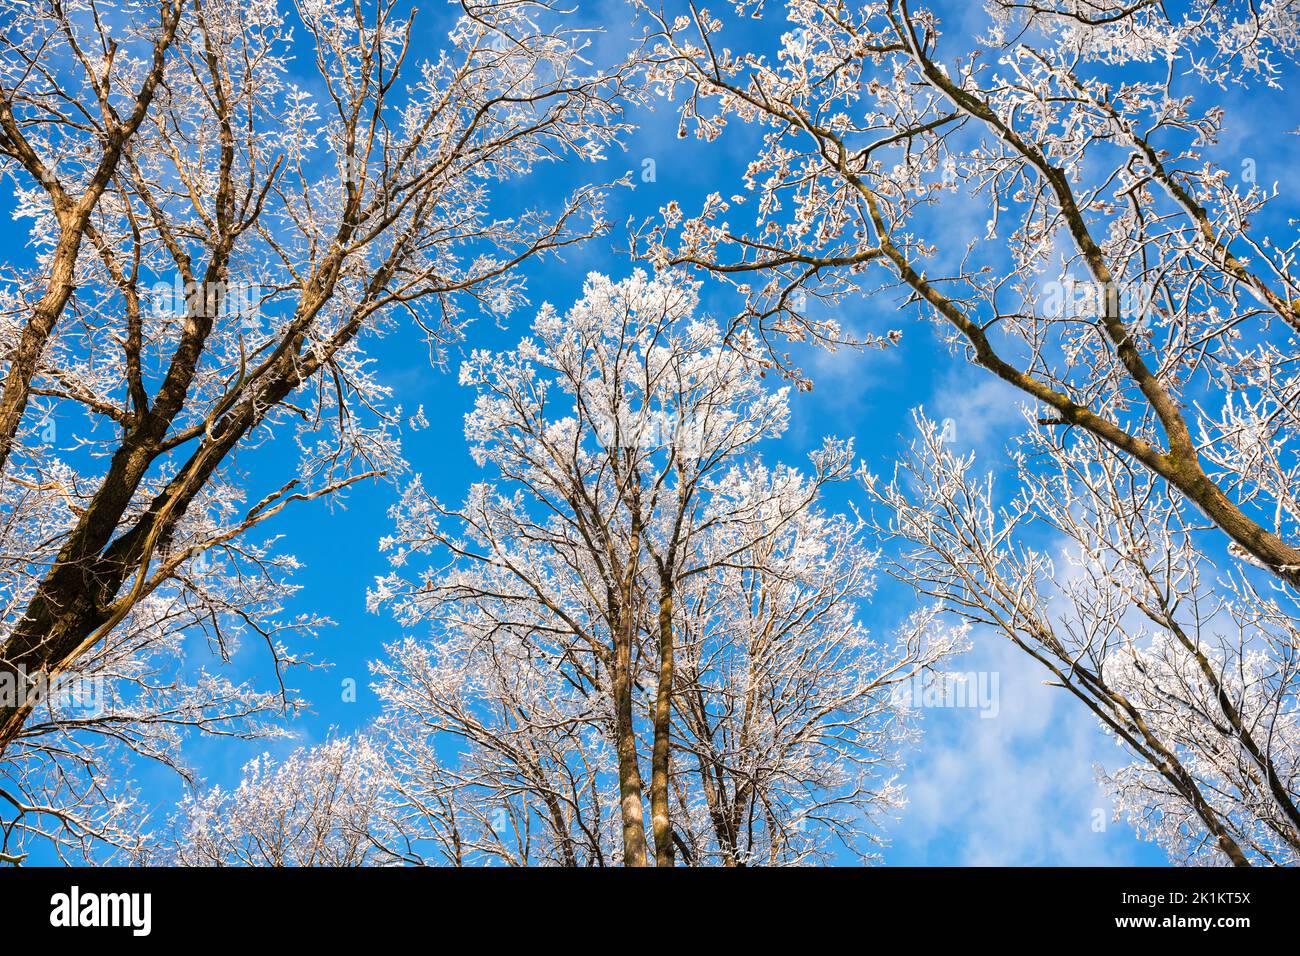 Bottom view on a f winter snowy trees in the blue sky. Frosty branches with hoarfrost twigs in a sunny day. Landscape photography Stock Photo